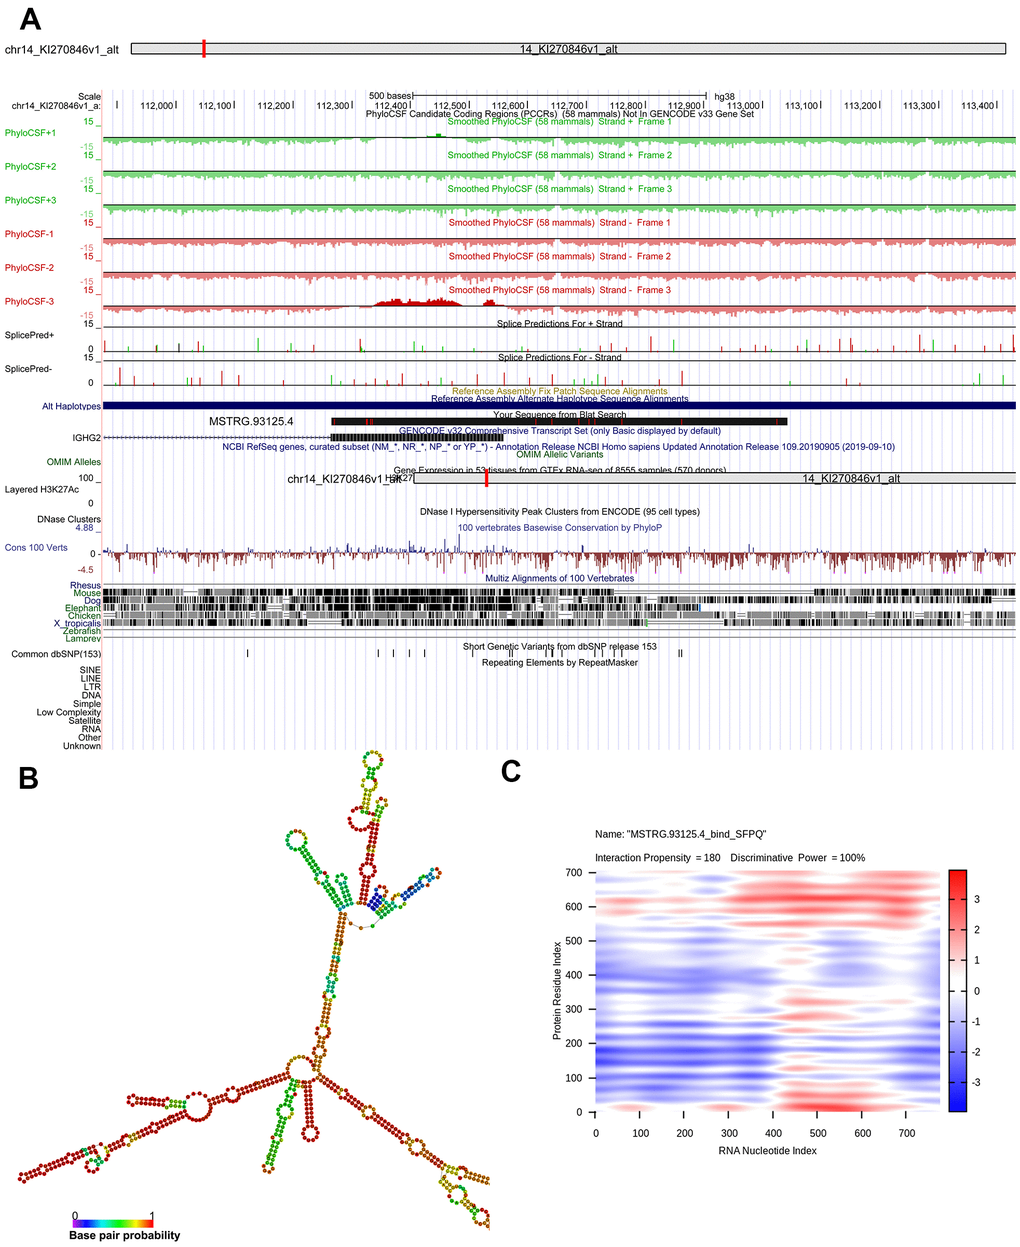 Bioinformatics analysis of MSTRG.93125.4. (A) chromosome location of MSTRG.93125.4; (B) optimal secondary structure for MSTRG.93125.4; (C) interaction between MSTRG.93125.4 and SFPQ.